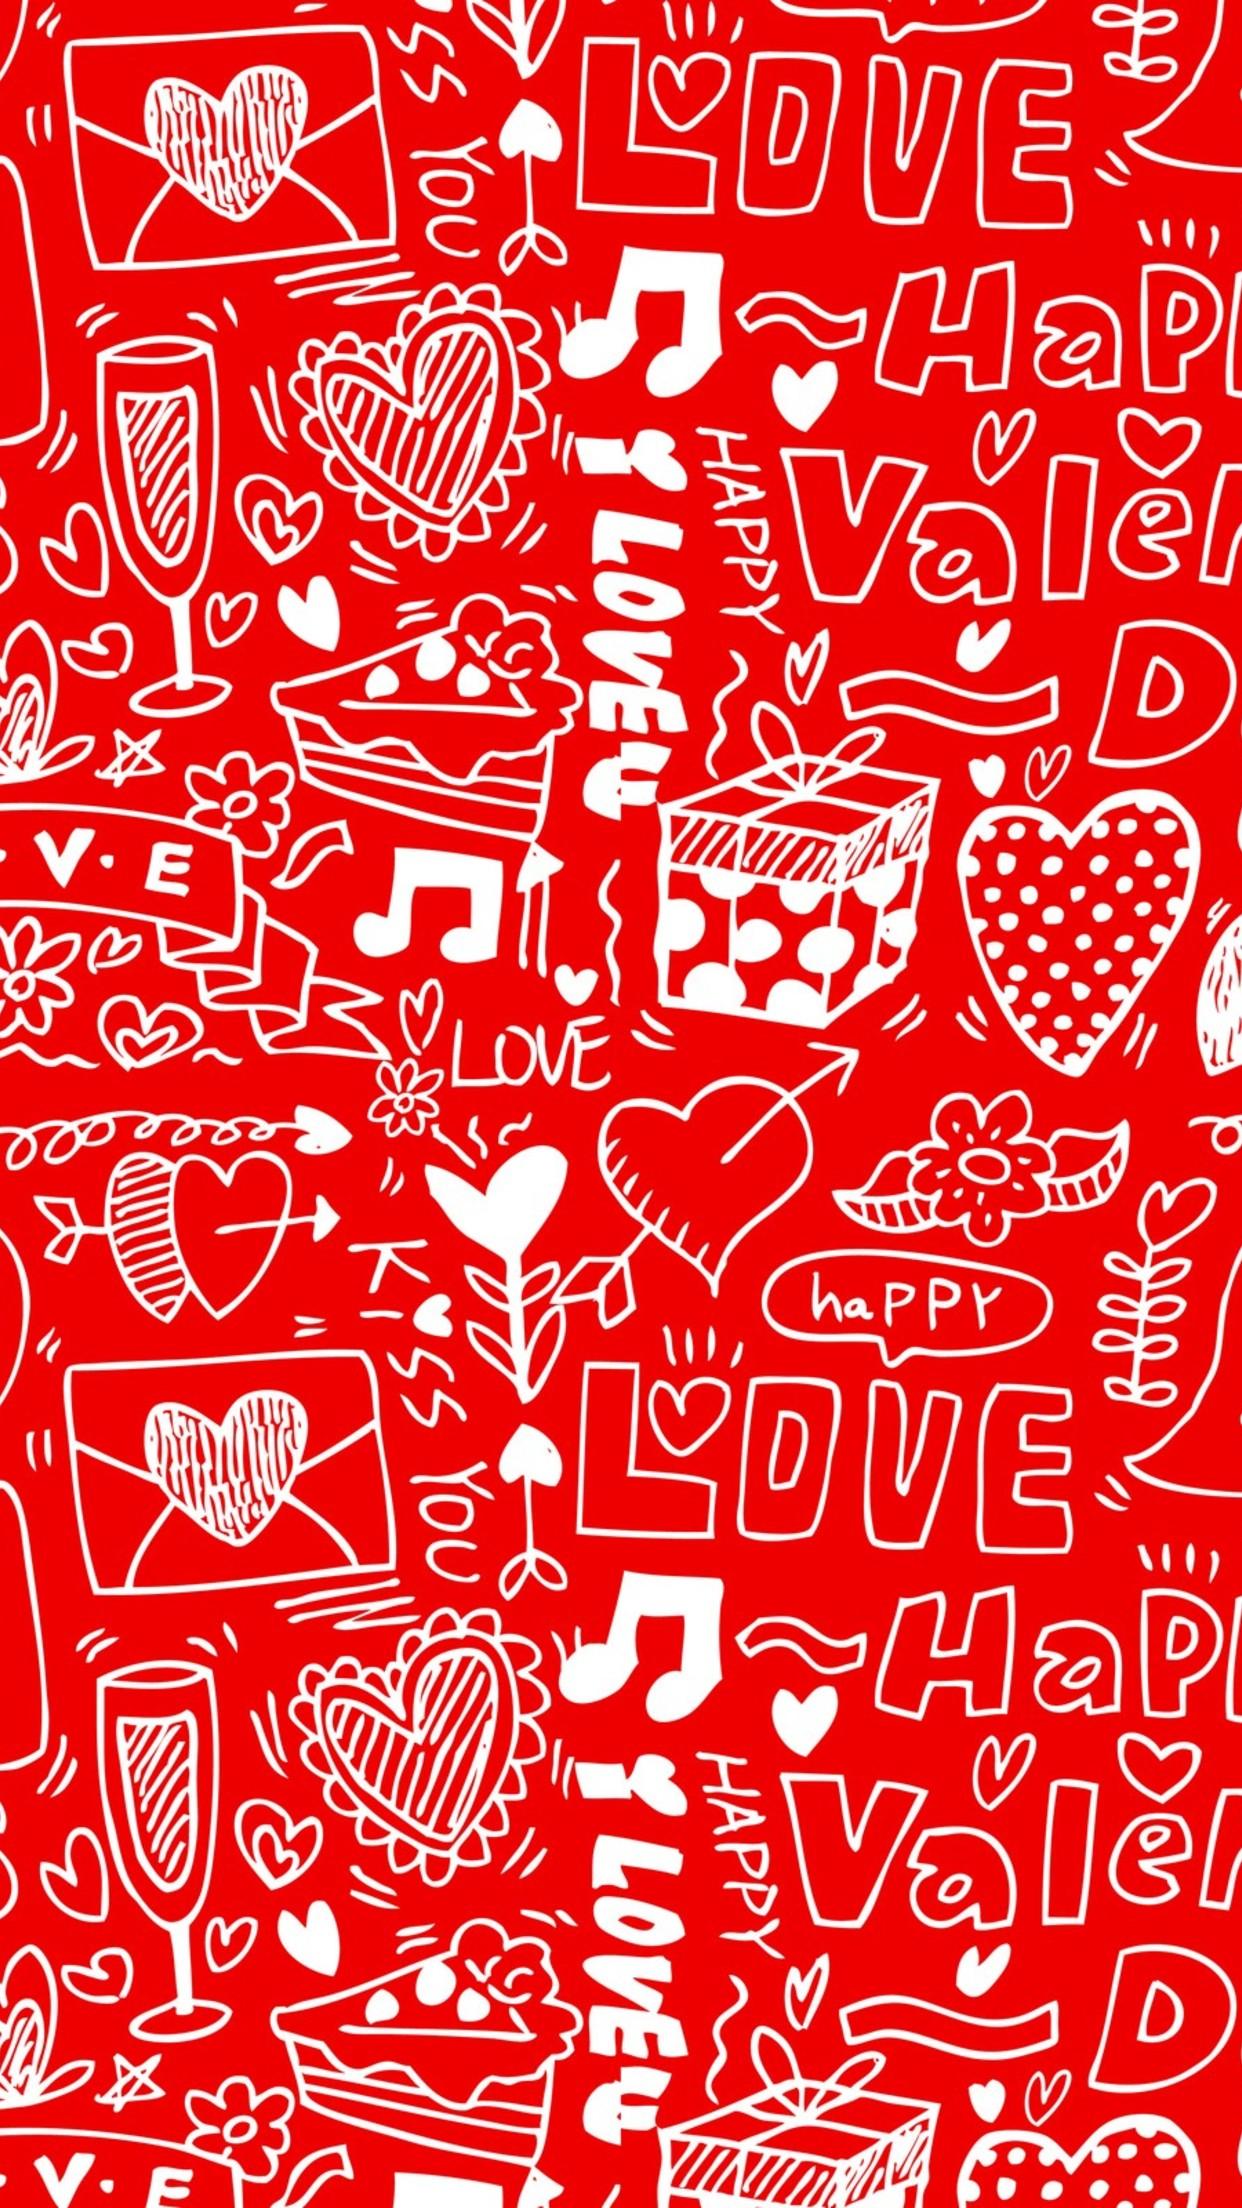 Valentine Day Message Wallpaper for iPhone X, 6